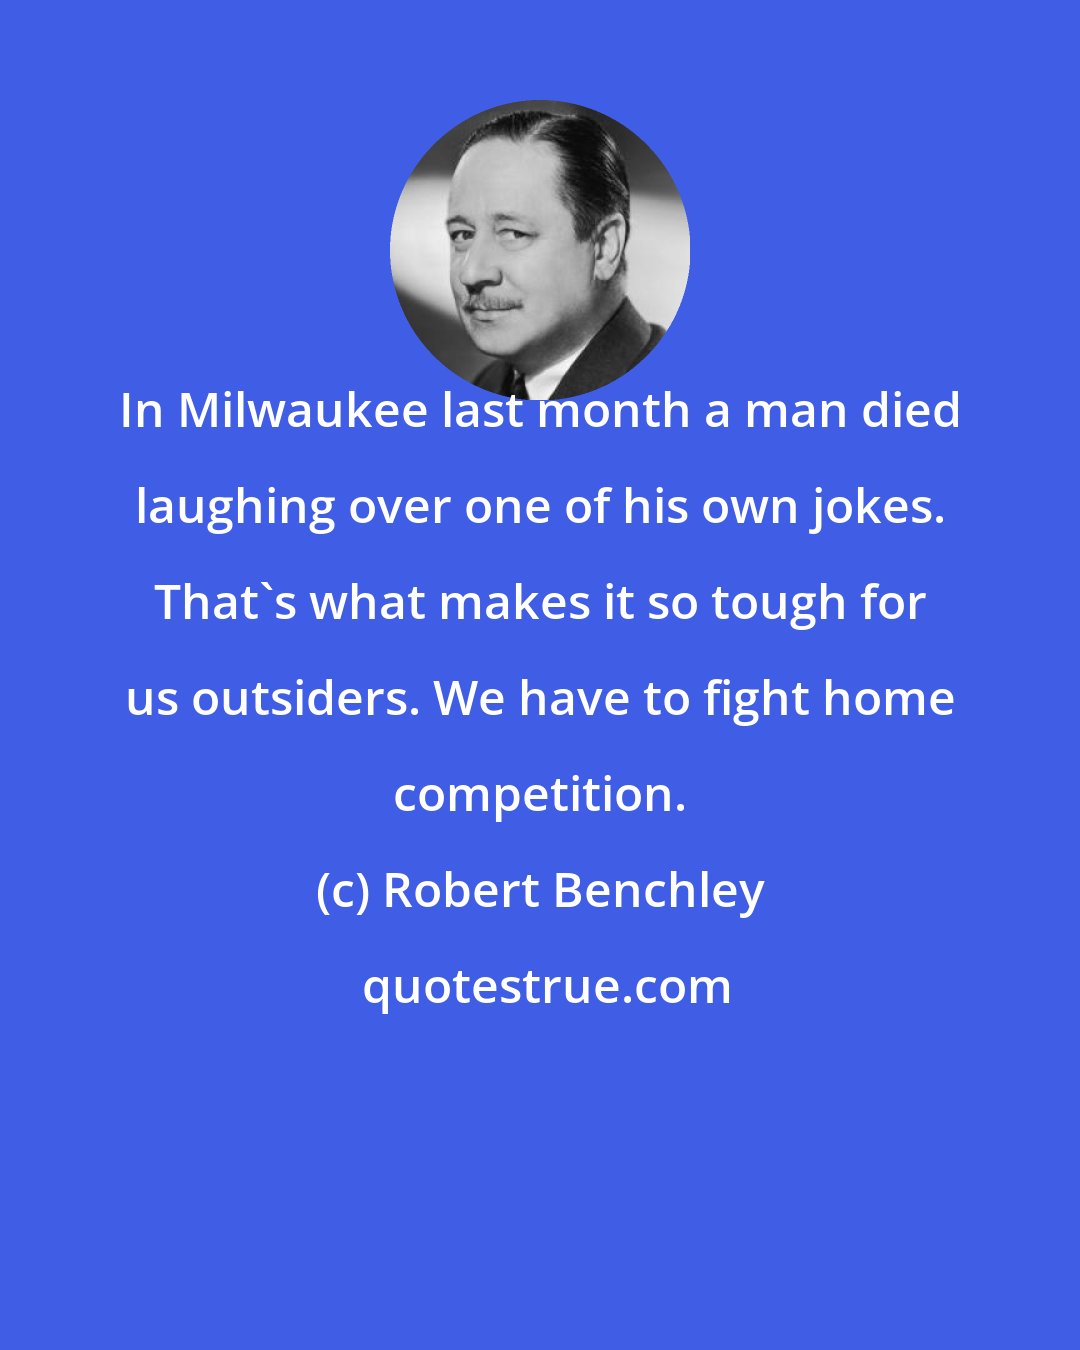 Robert Benchley: In Milwaukee last month a man died laughing over one of his own jokes. That's what makes it so tough for us outsiders. We have to fight home competition.